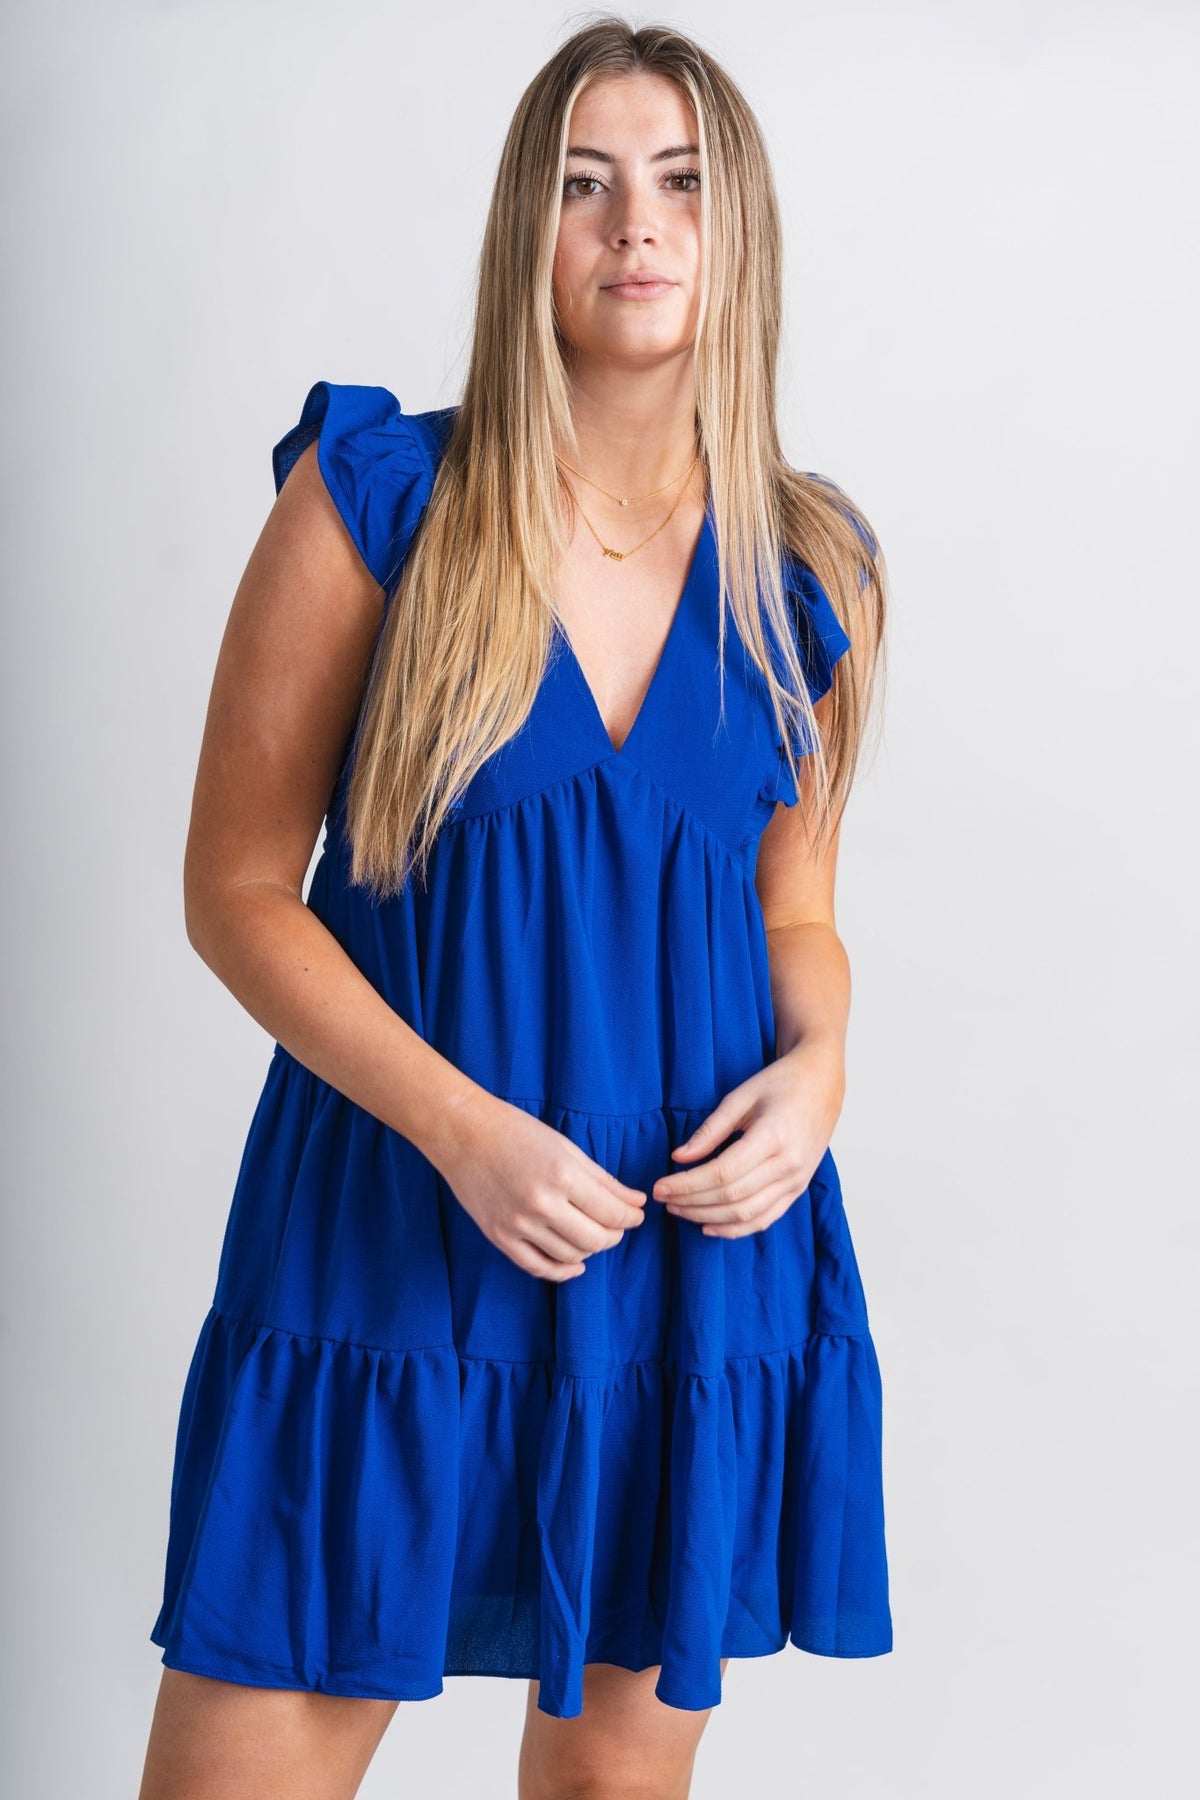 Ruffle sleeve dress royal blue - Trendy dress - Cute Vacation Collection at Lush Fashion Lounge Boutique in Oklahoma City